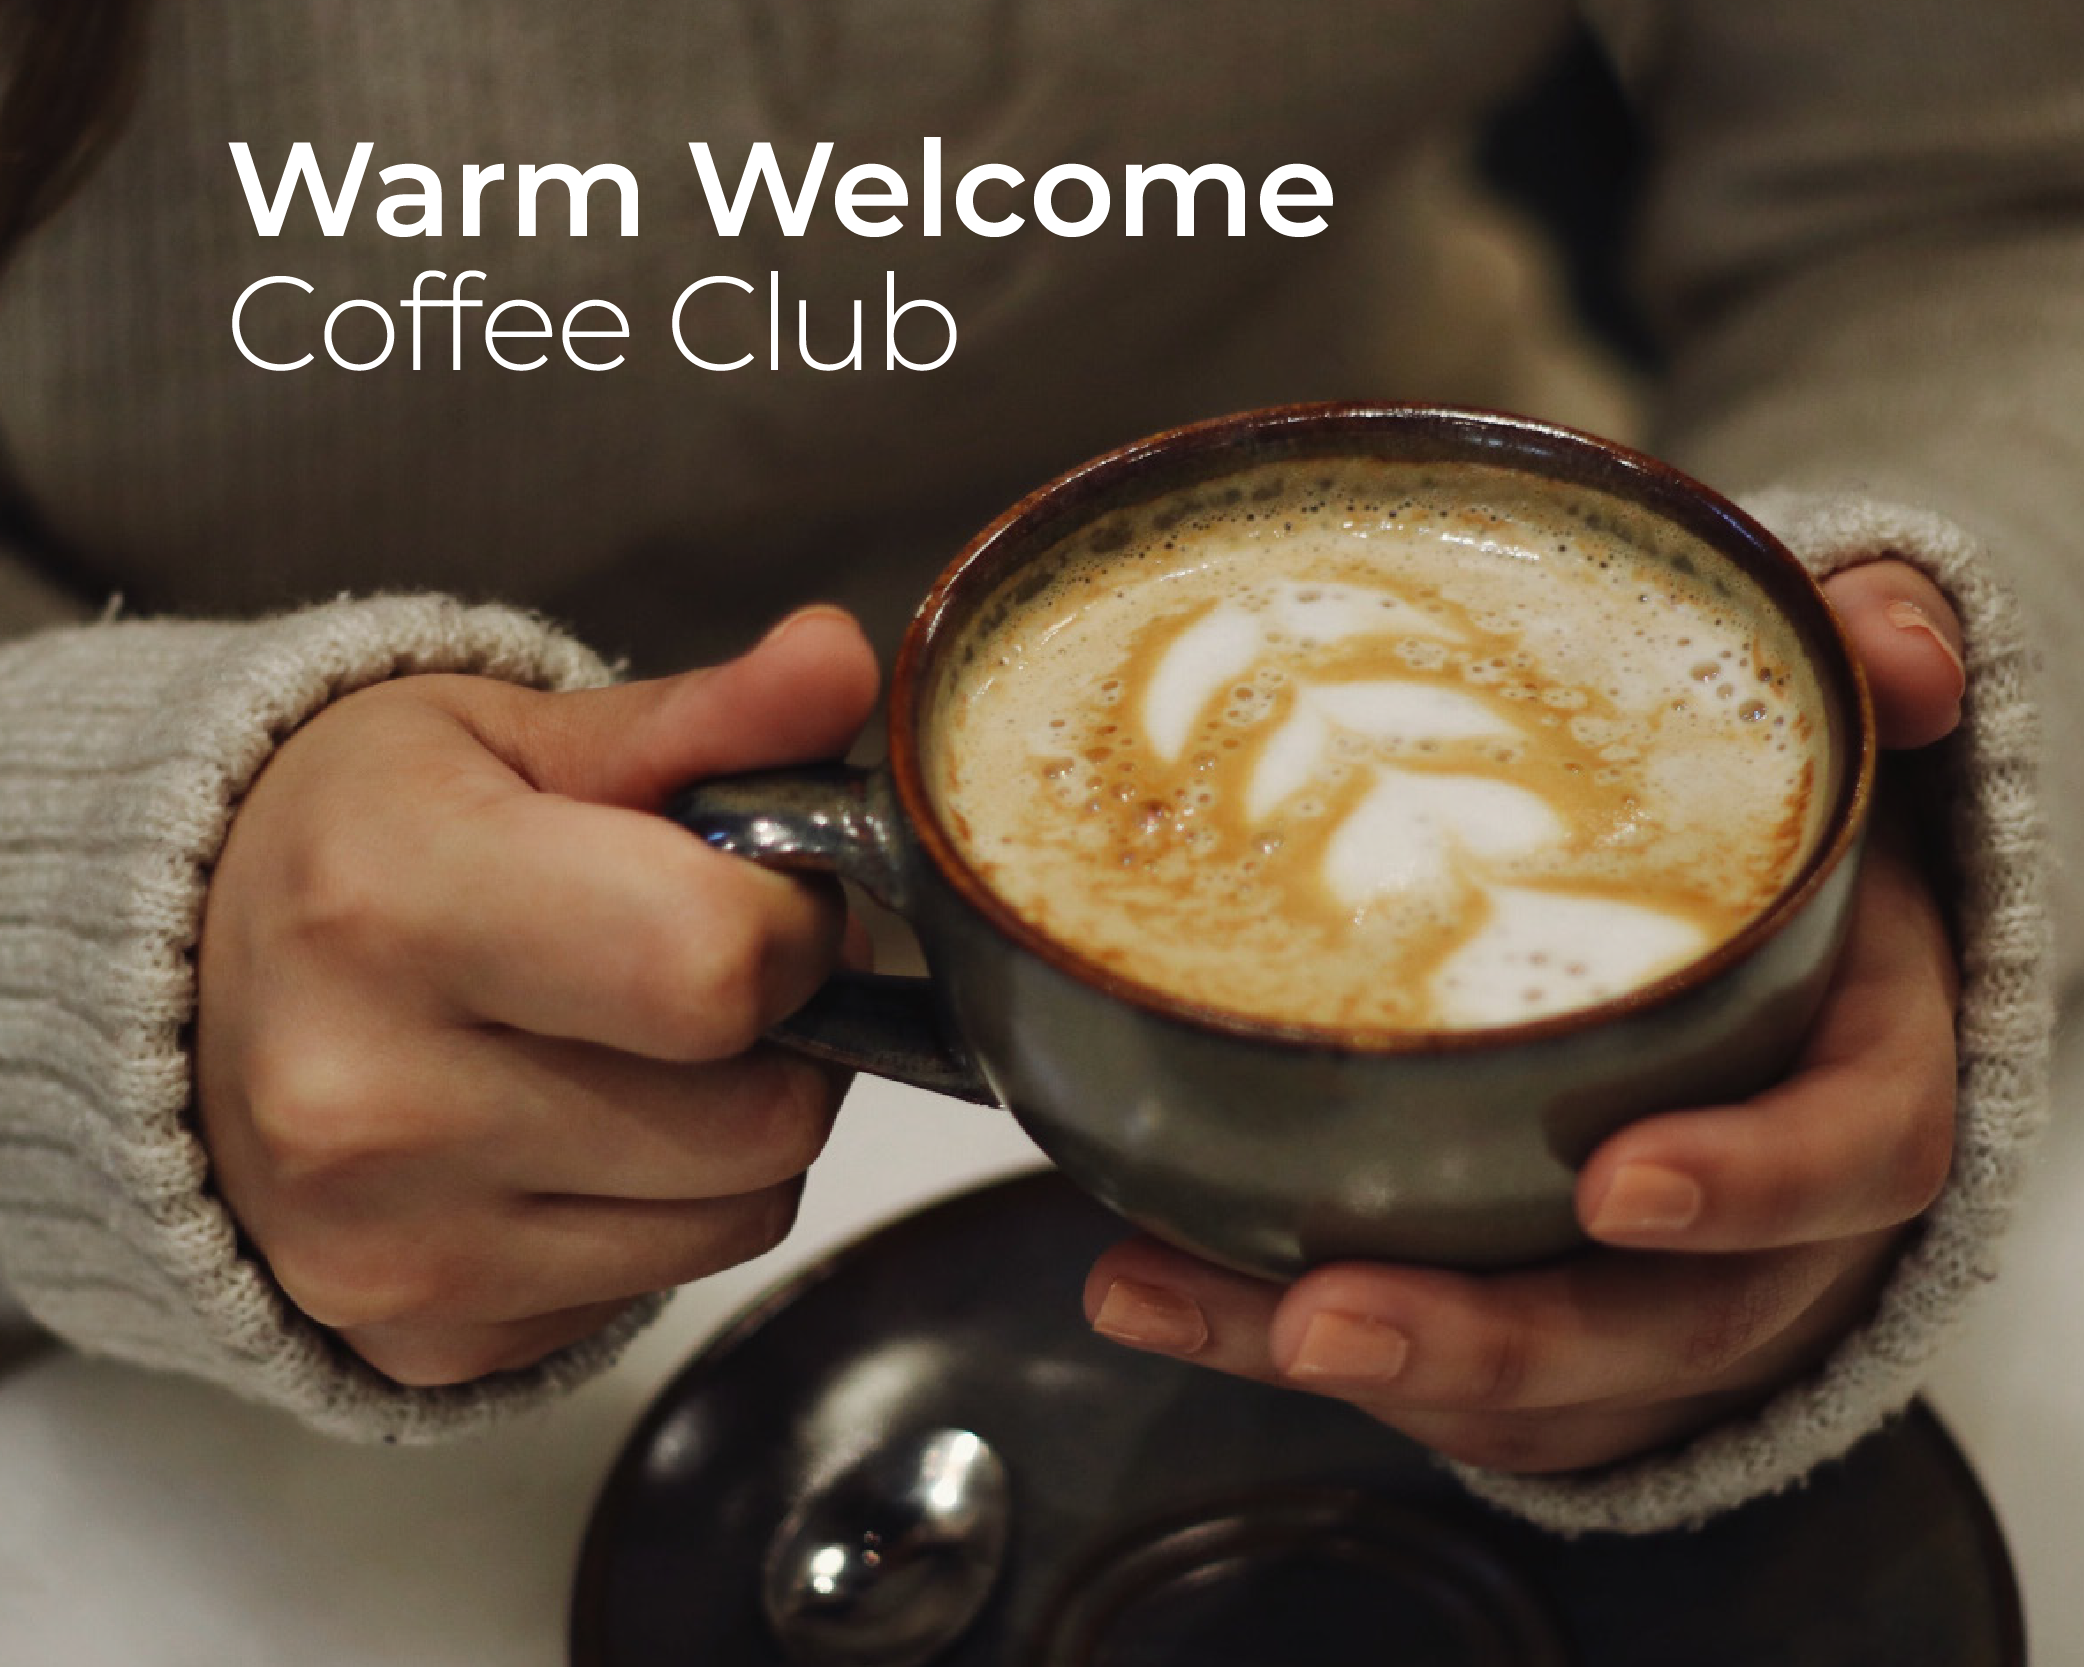 An image of a person holding a cup of coffee. There is overlayed text in the top left corner which reads: Warm Welcome Coffee Club.